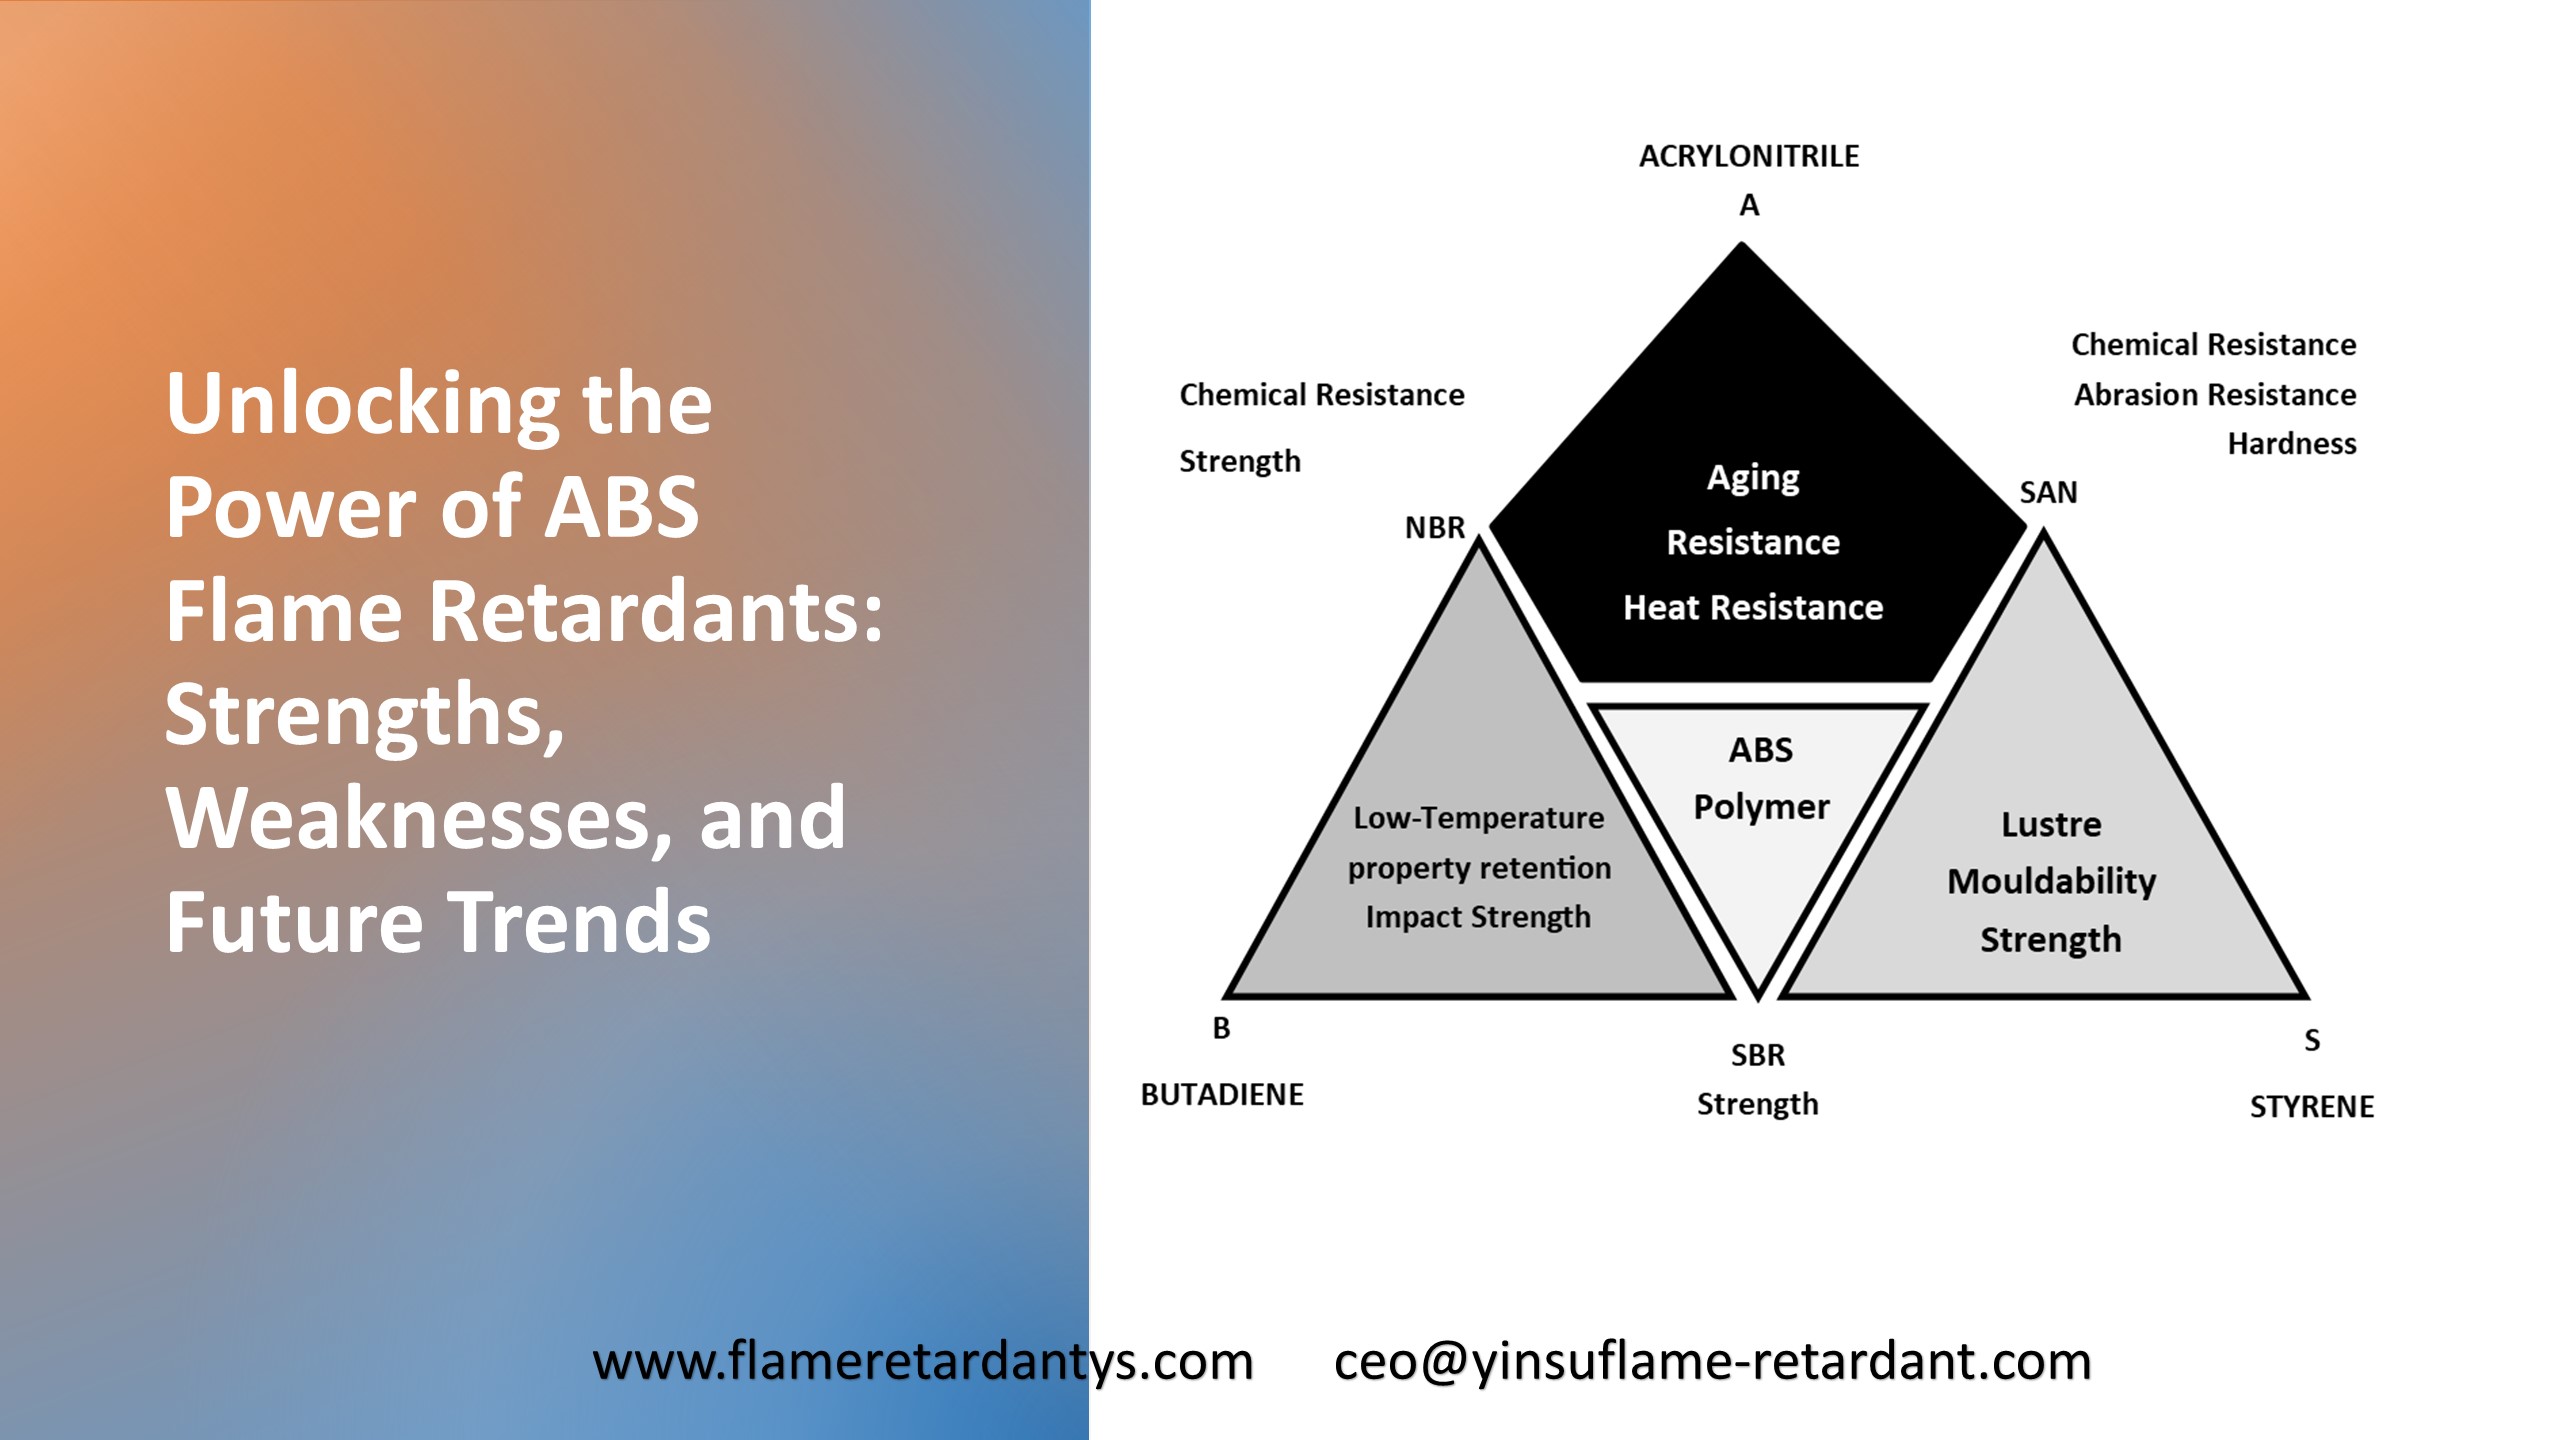 Unlocking the Power of ABS Flame Retardants Strengths, Weaknesses, and Future Trends